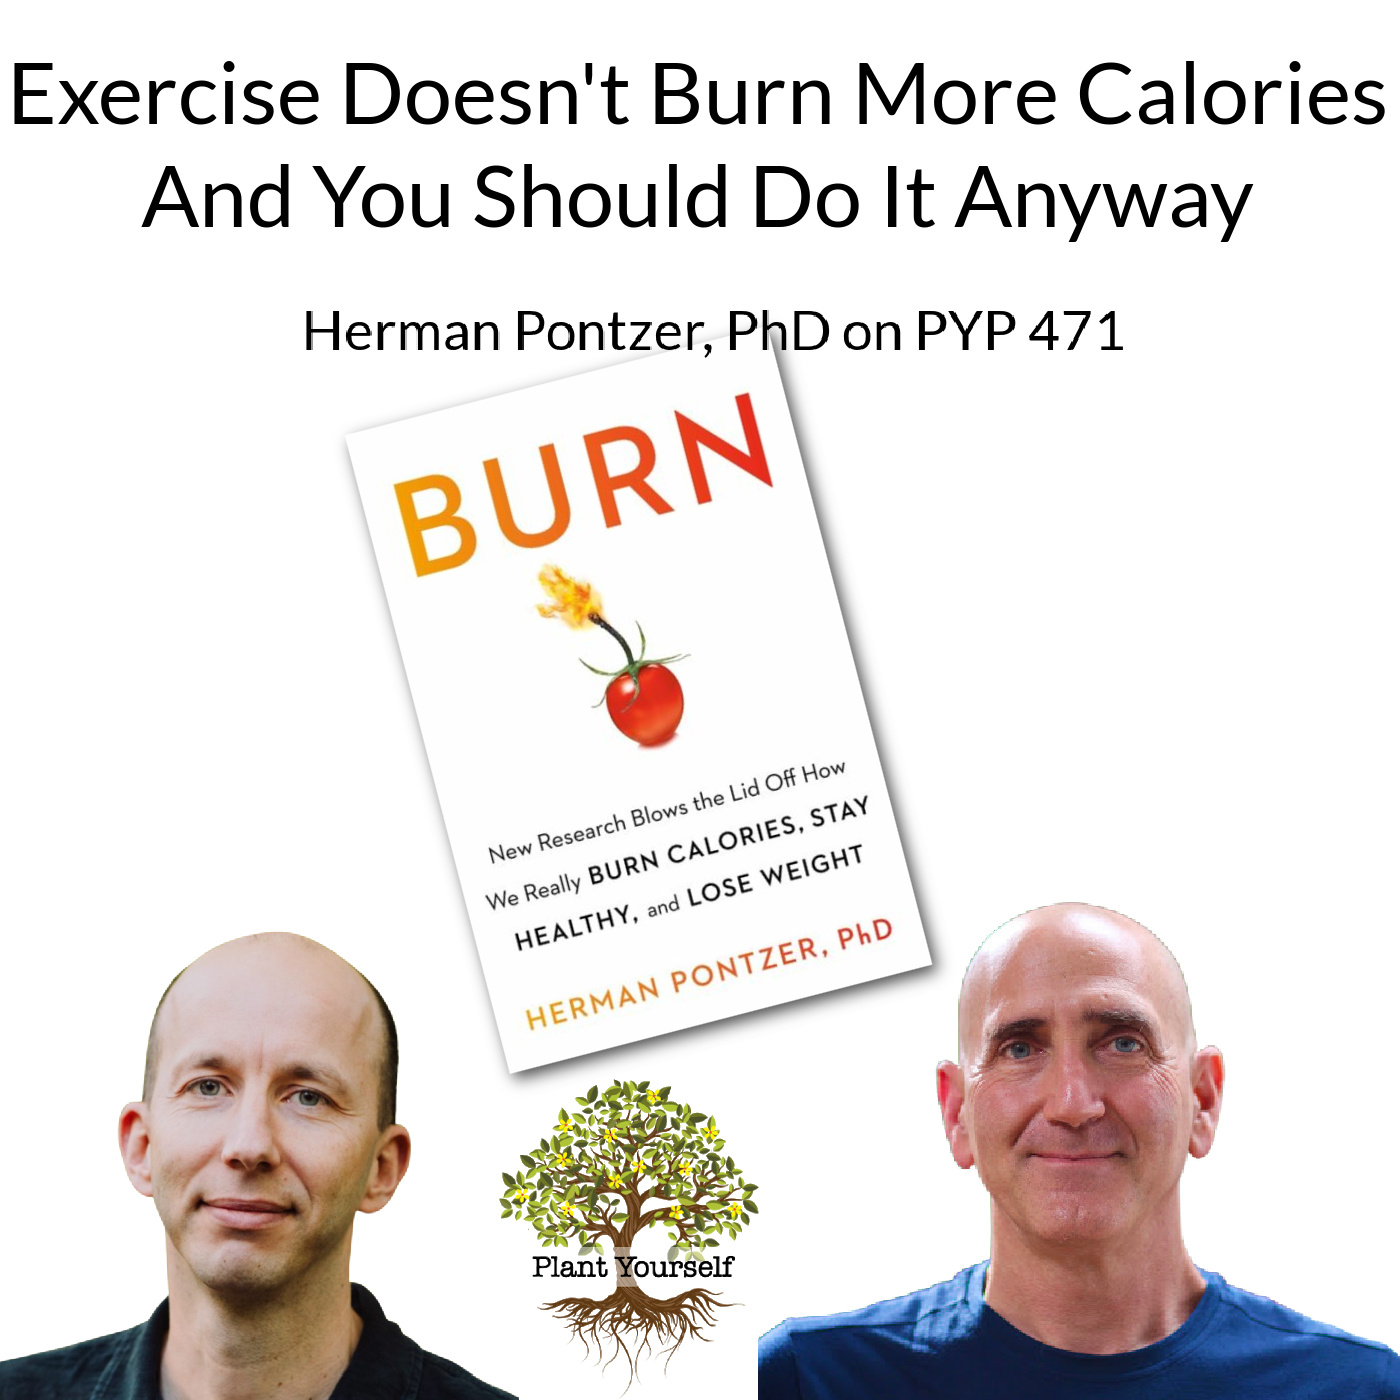 Exercise Doesn't Burn More Calories and You Should Do It Anyway: Herman Pontzer on PYP 471